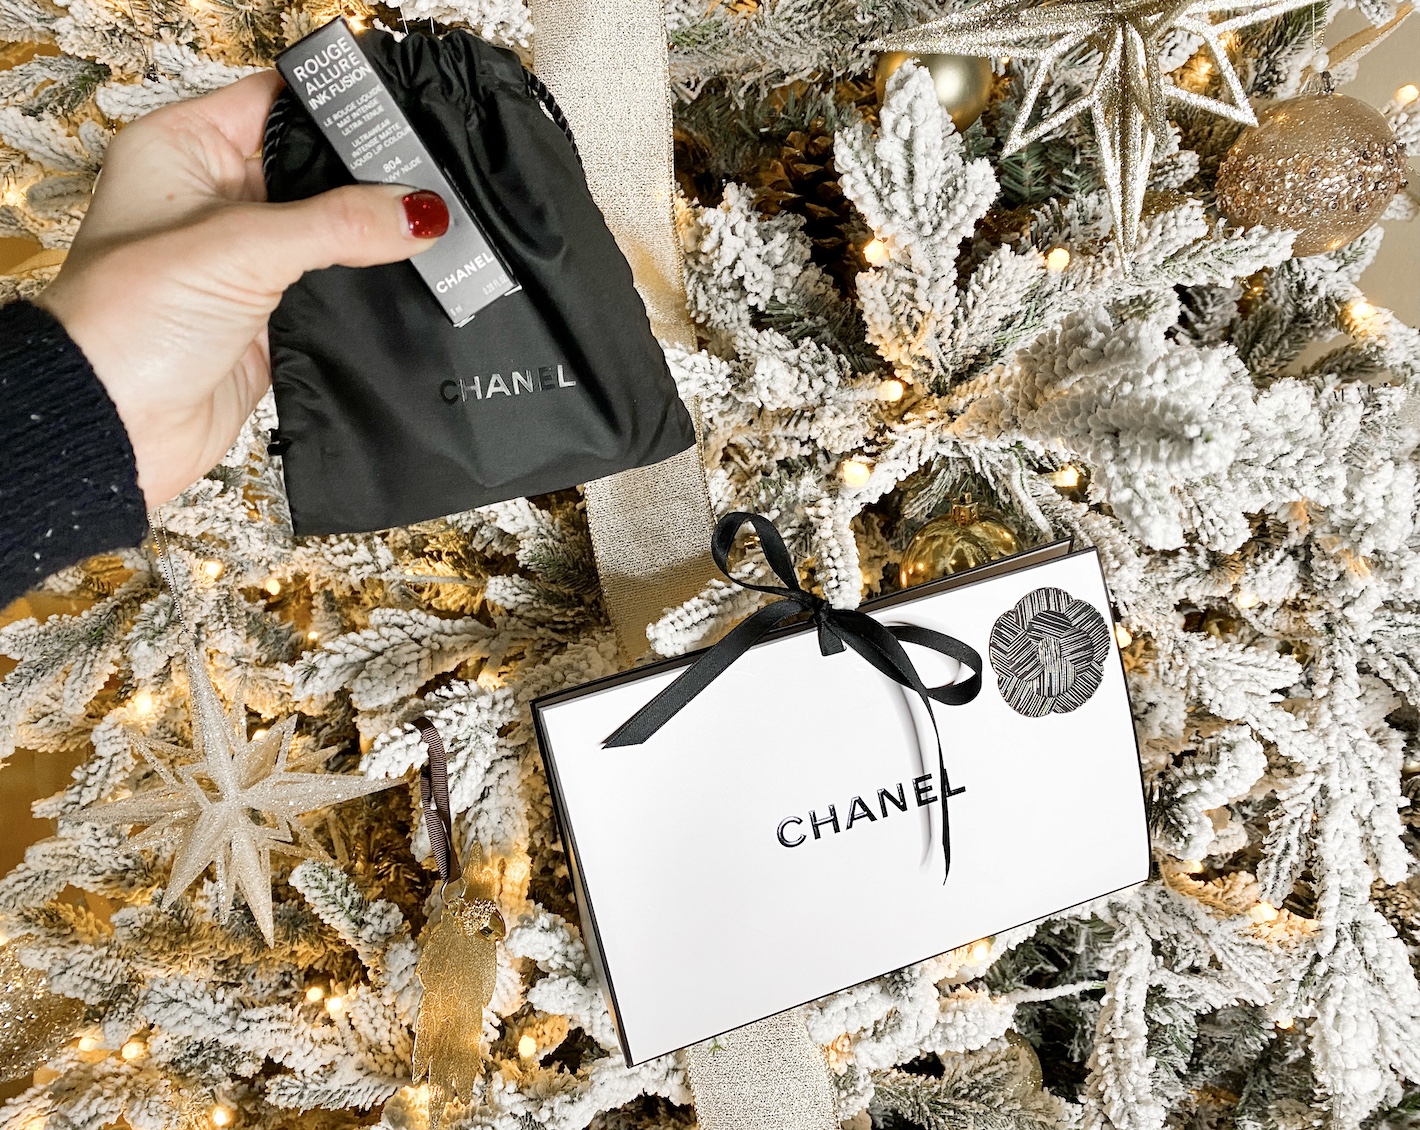 Chanel  Gifts, Gift wrapping, Chanel